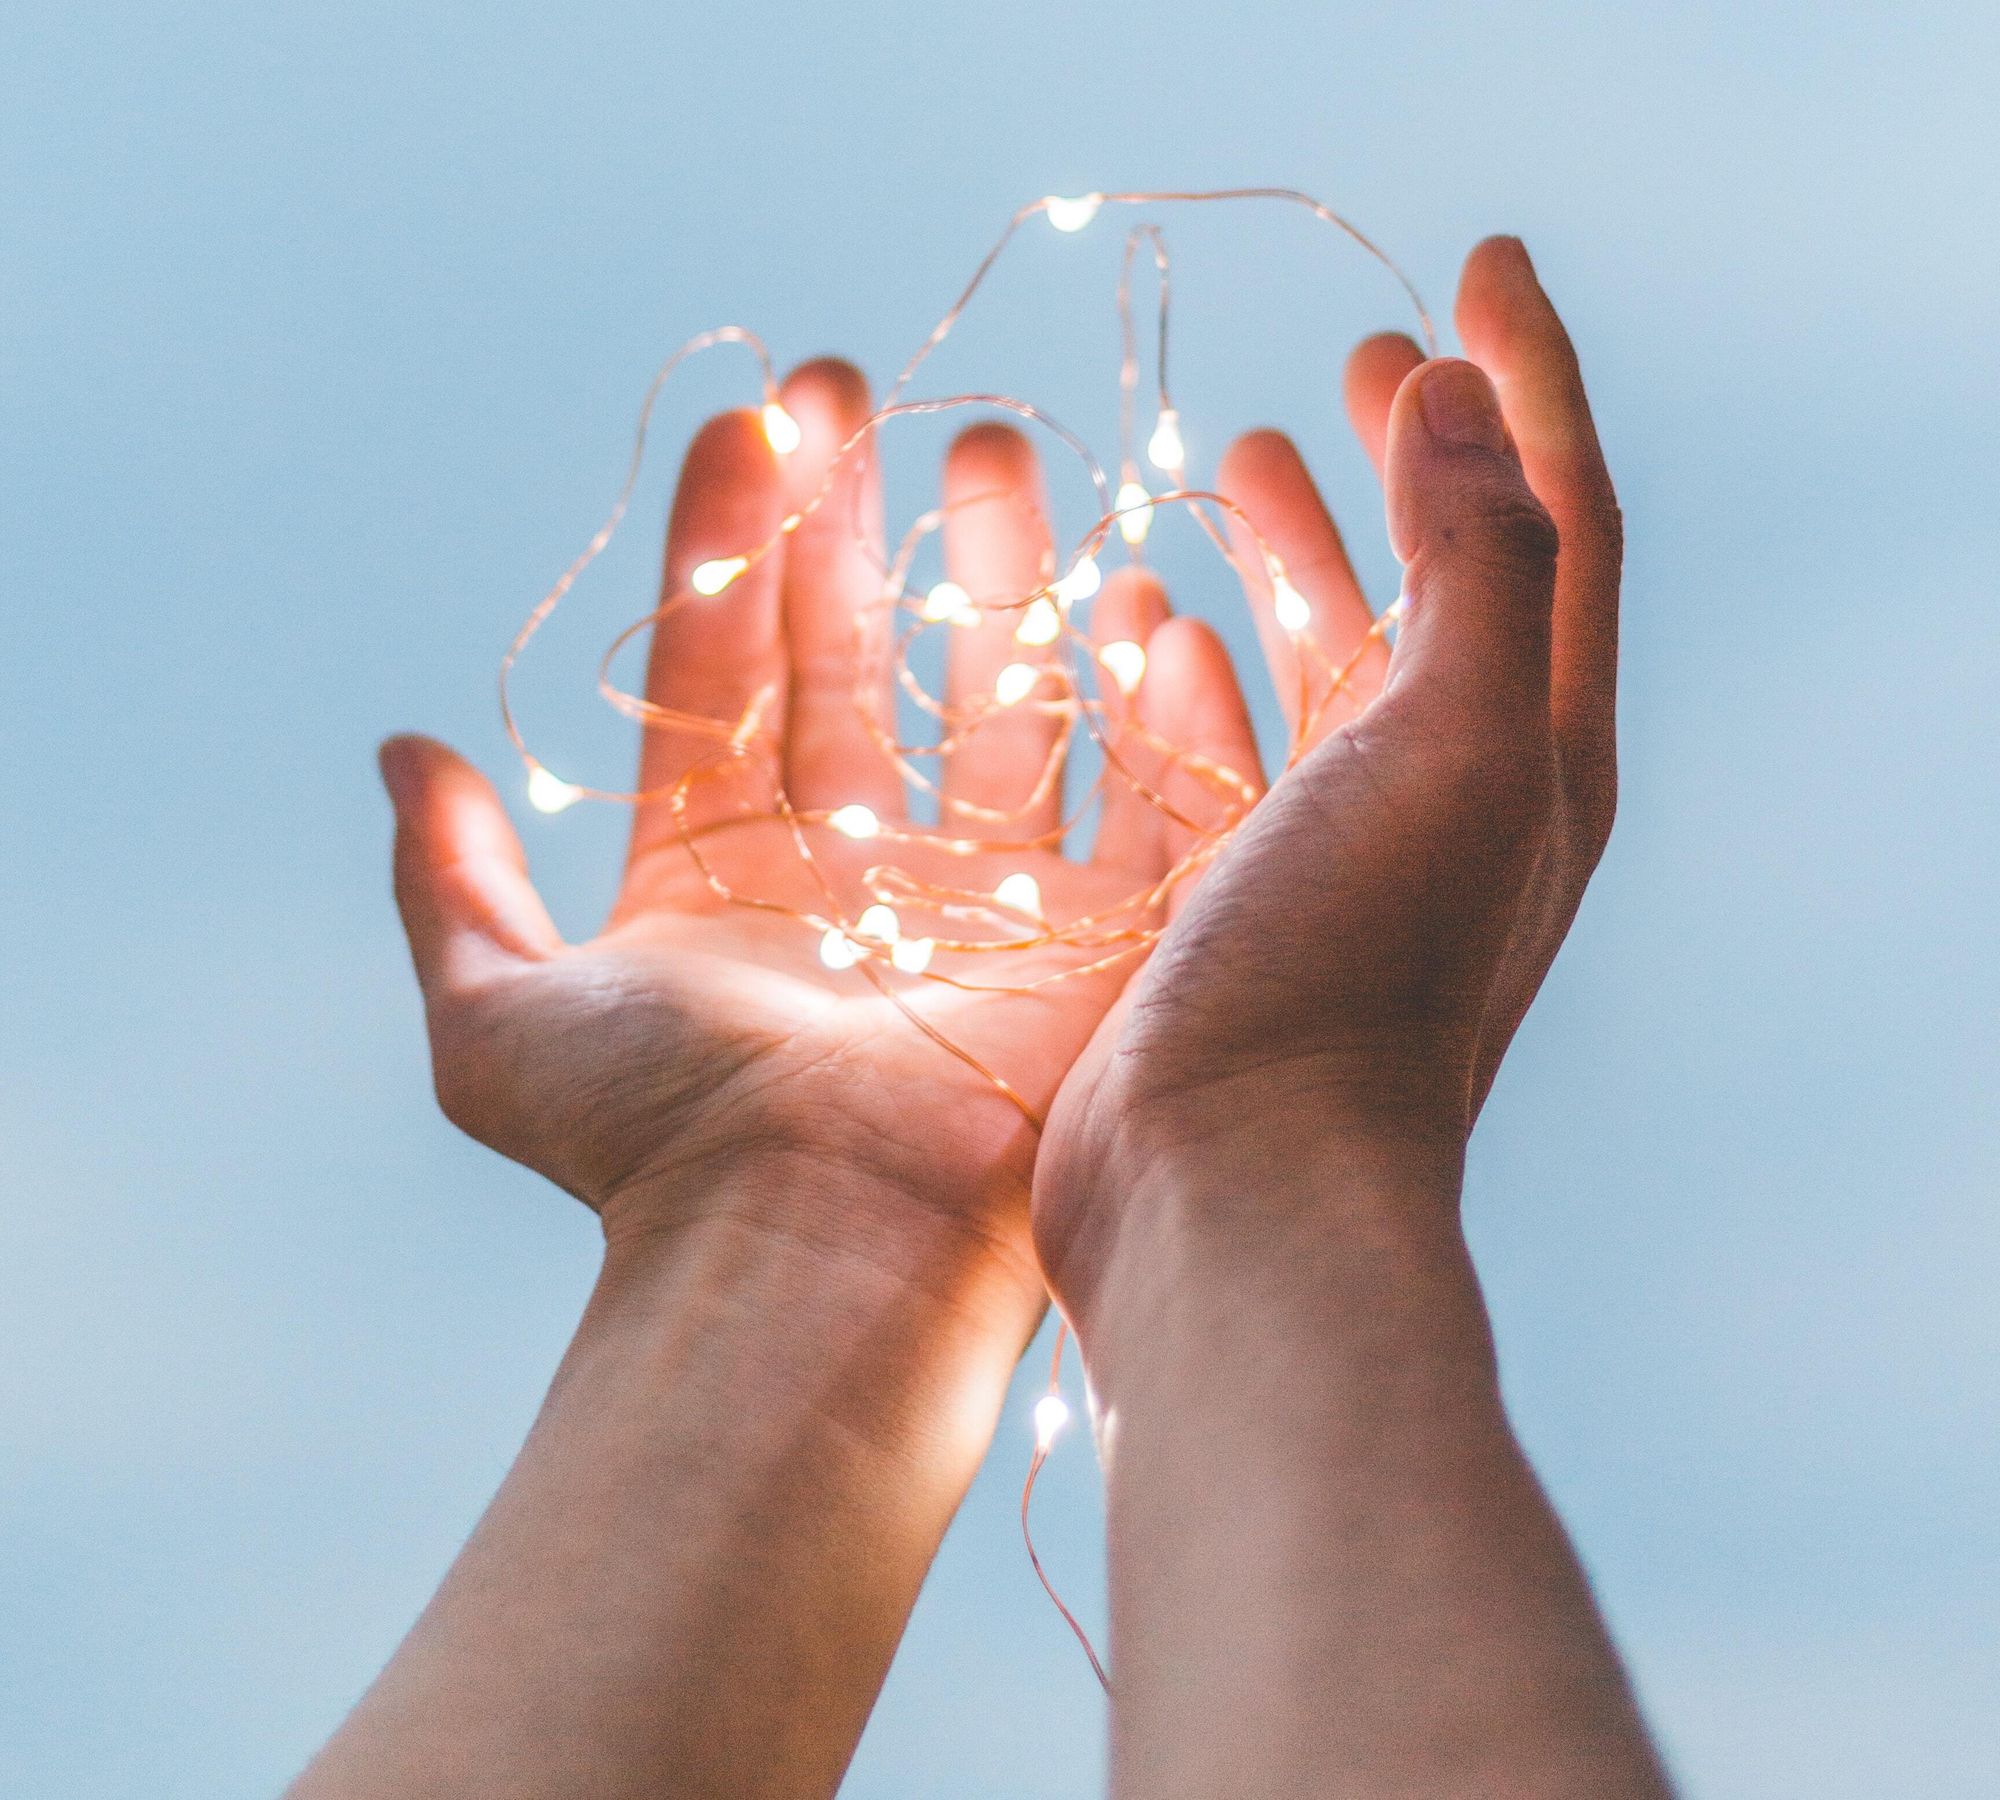 Image of two hands holding a string of white lights to symbolize embrace of an idea